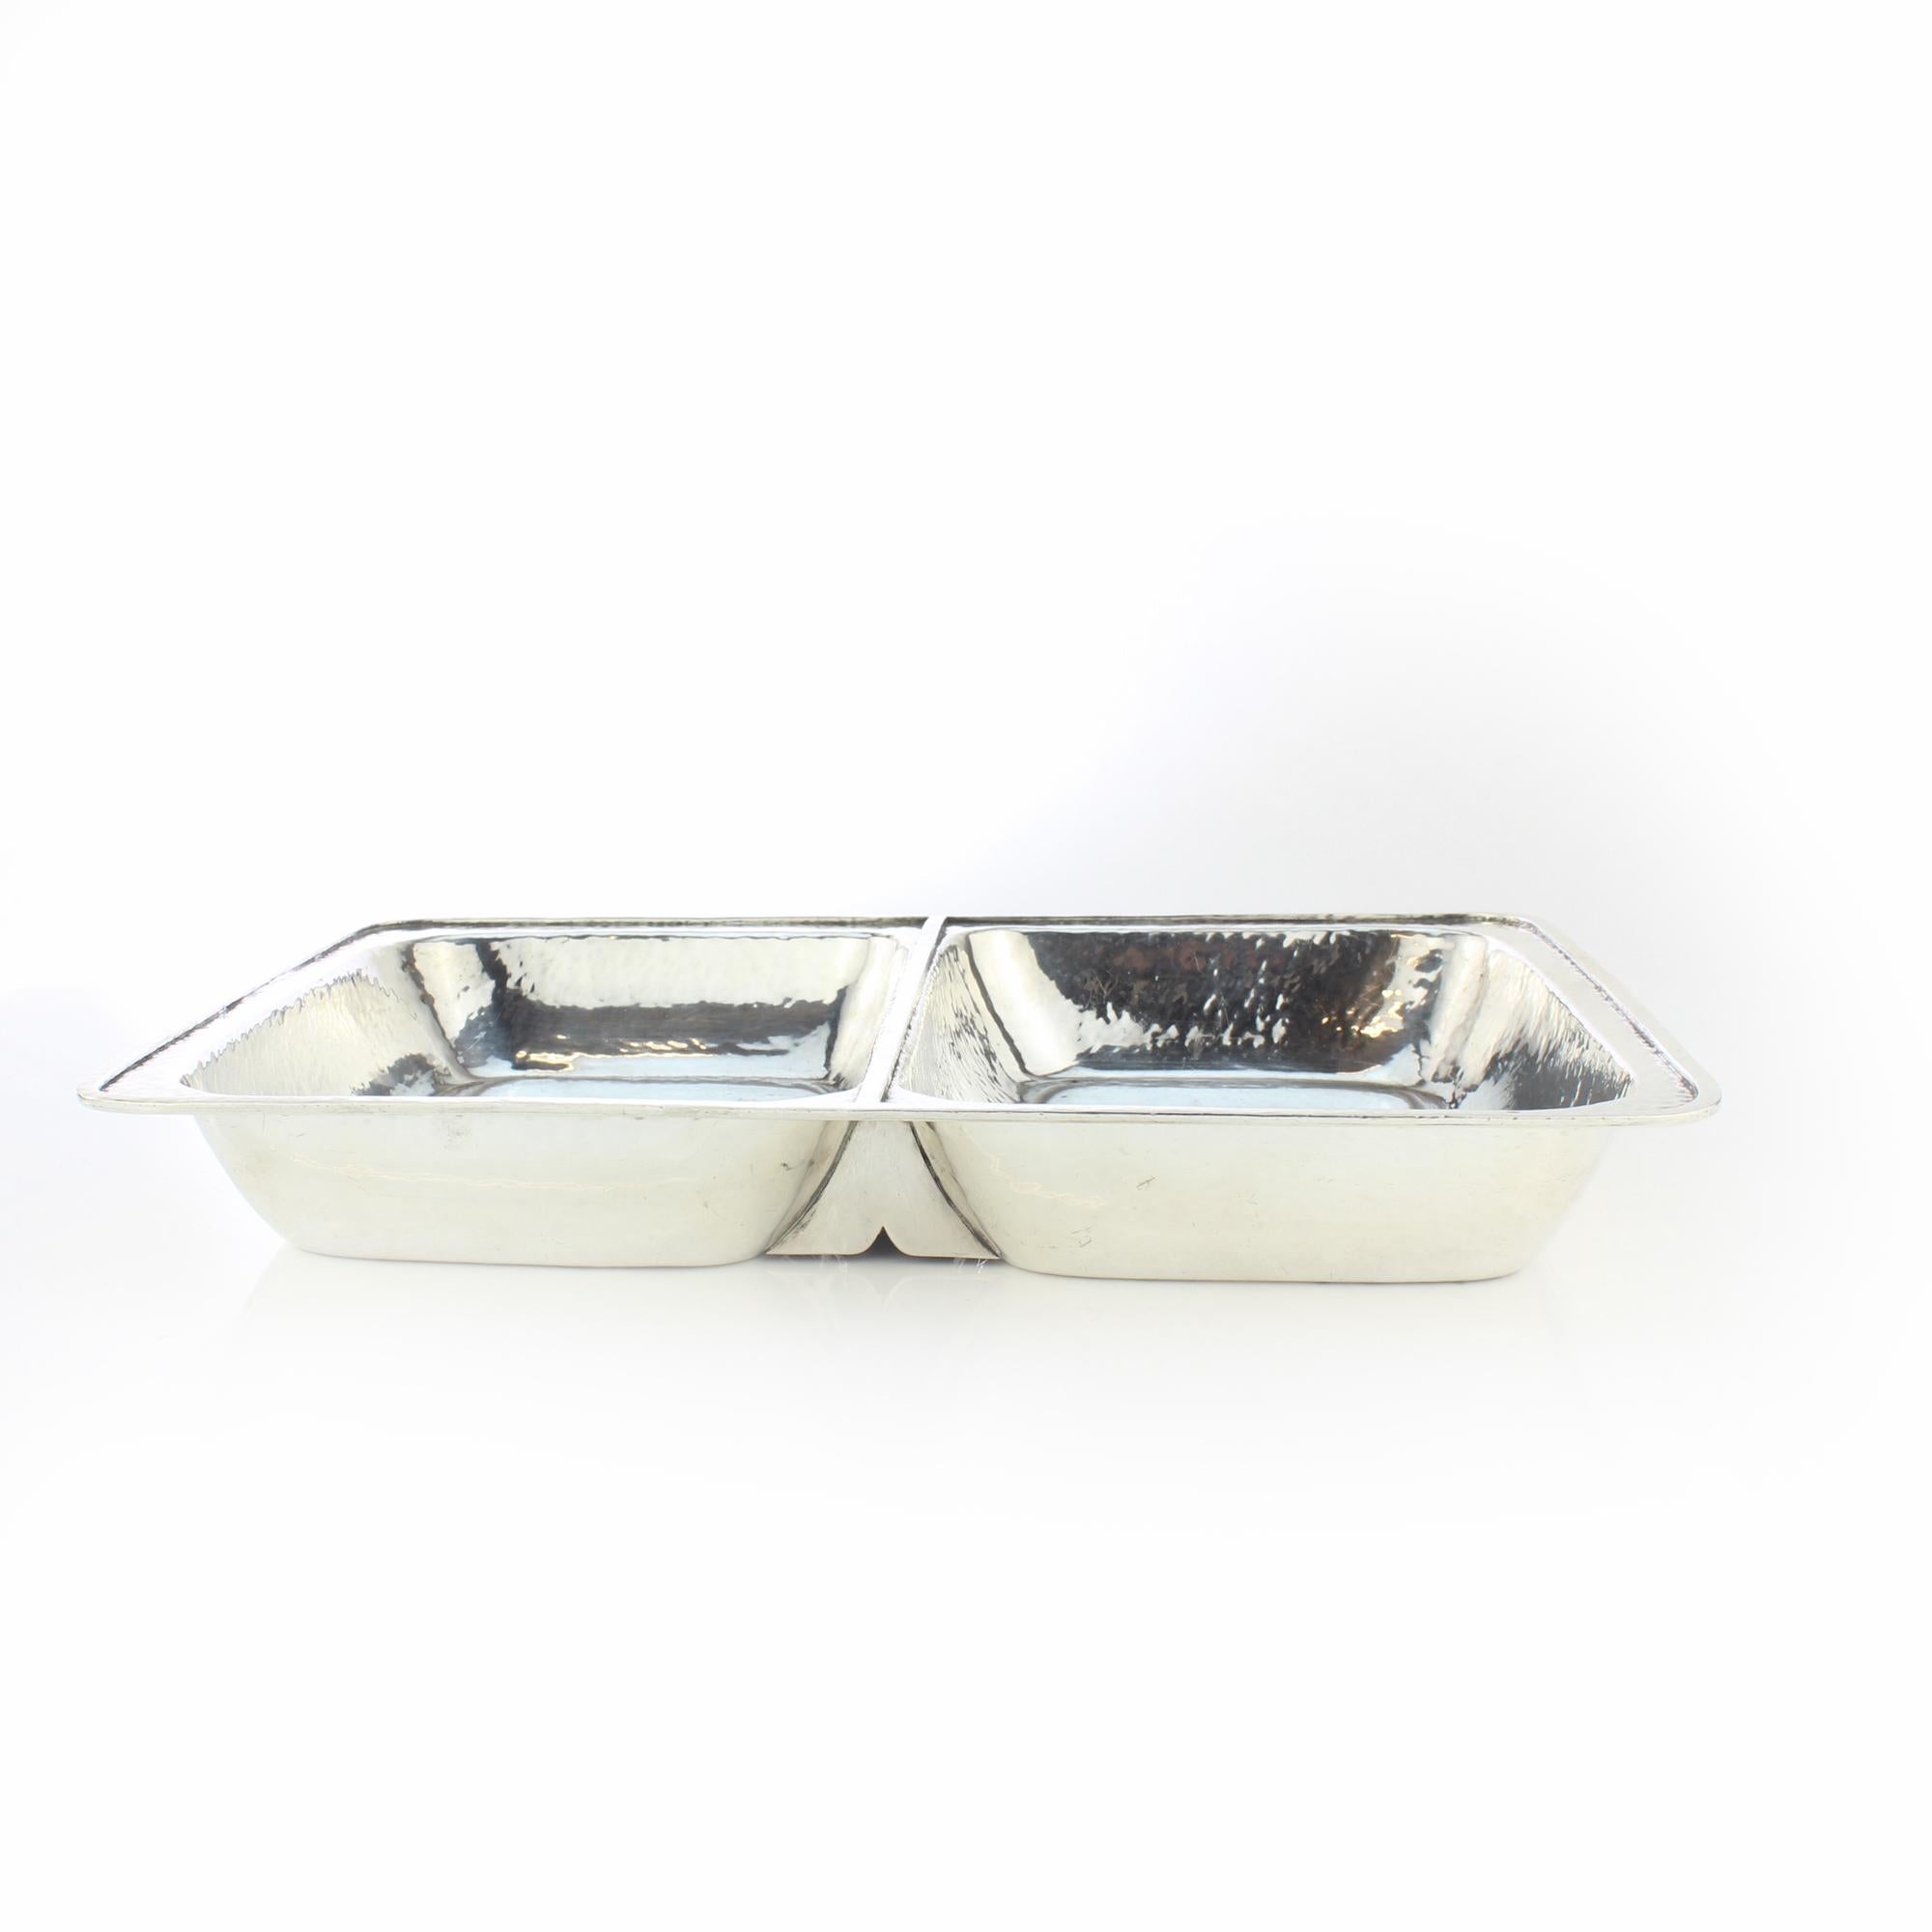 Antique 20th Century American Arts & Crafts Sterling Silver Twin Entrée Dish In Good Condition For Sale In Braintree, GB